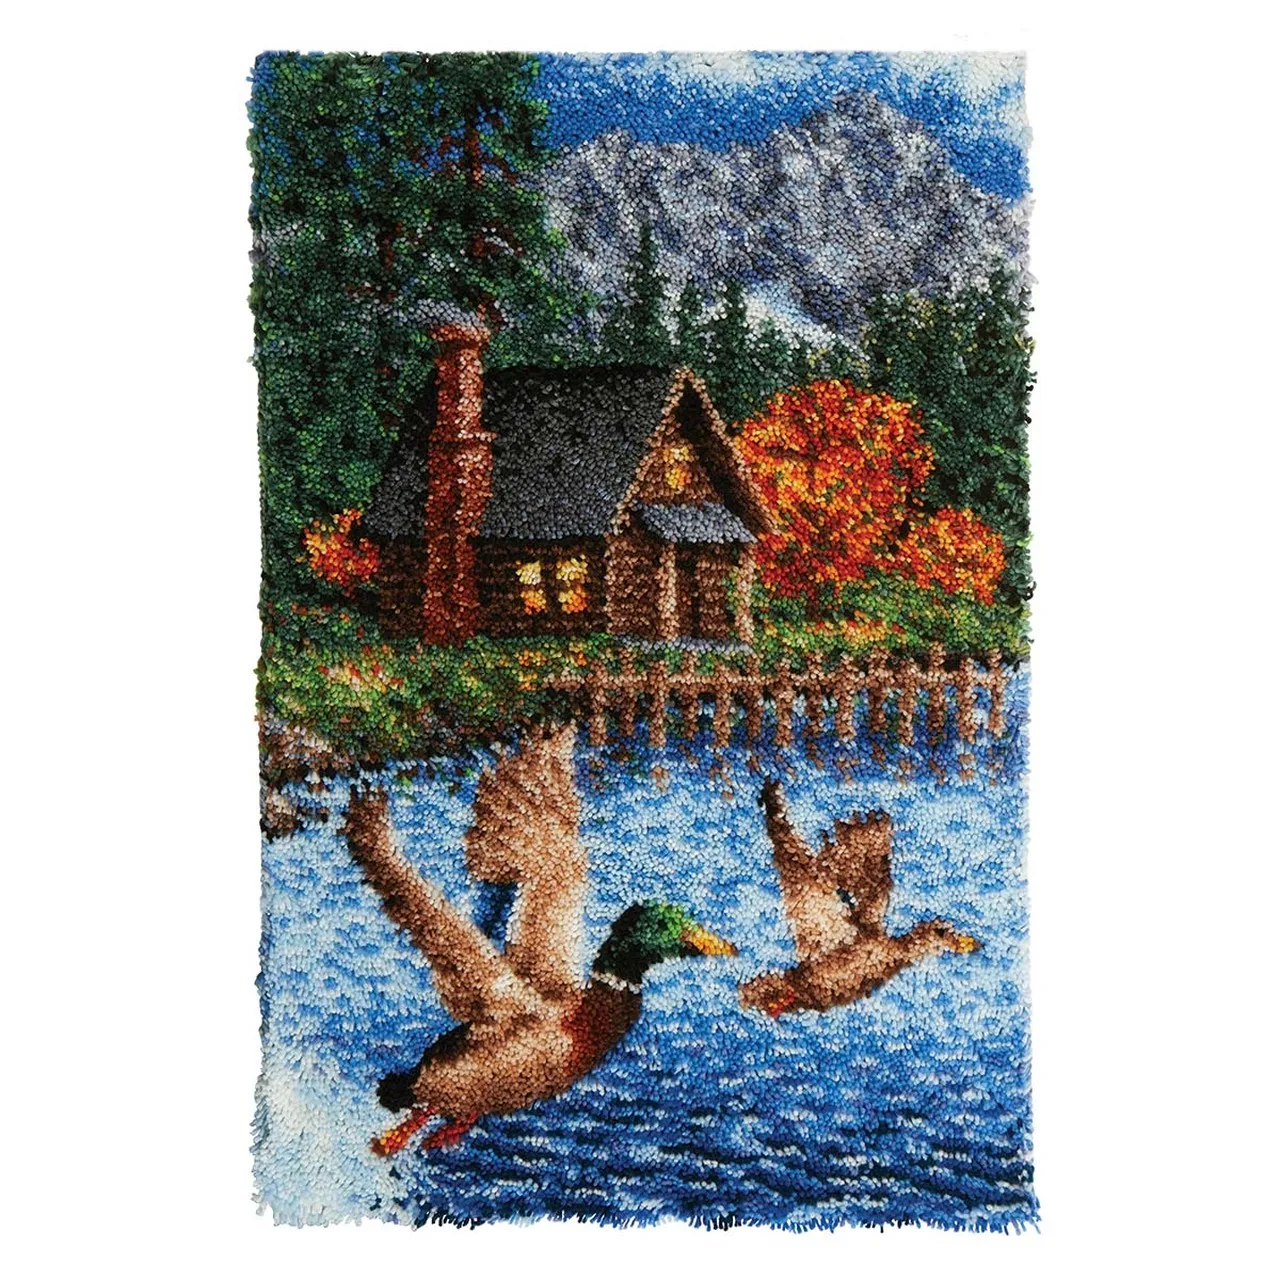 

Latch Hook Rug Mallard Lake Wall Tapestry DIY Carpet Rug Pre-Printed Canvas with Non-Skid Backing Floor Mat 69x102cm